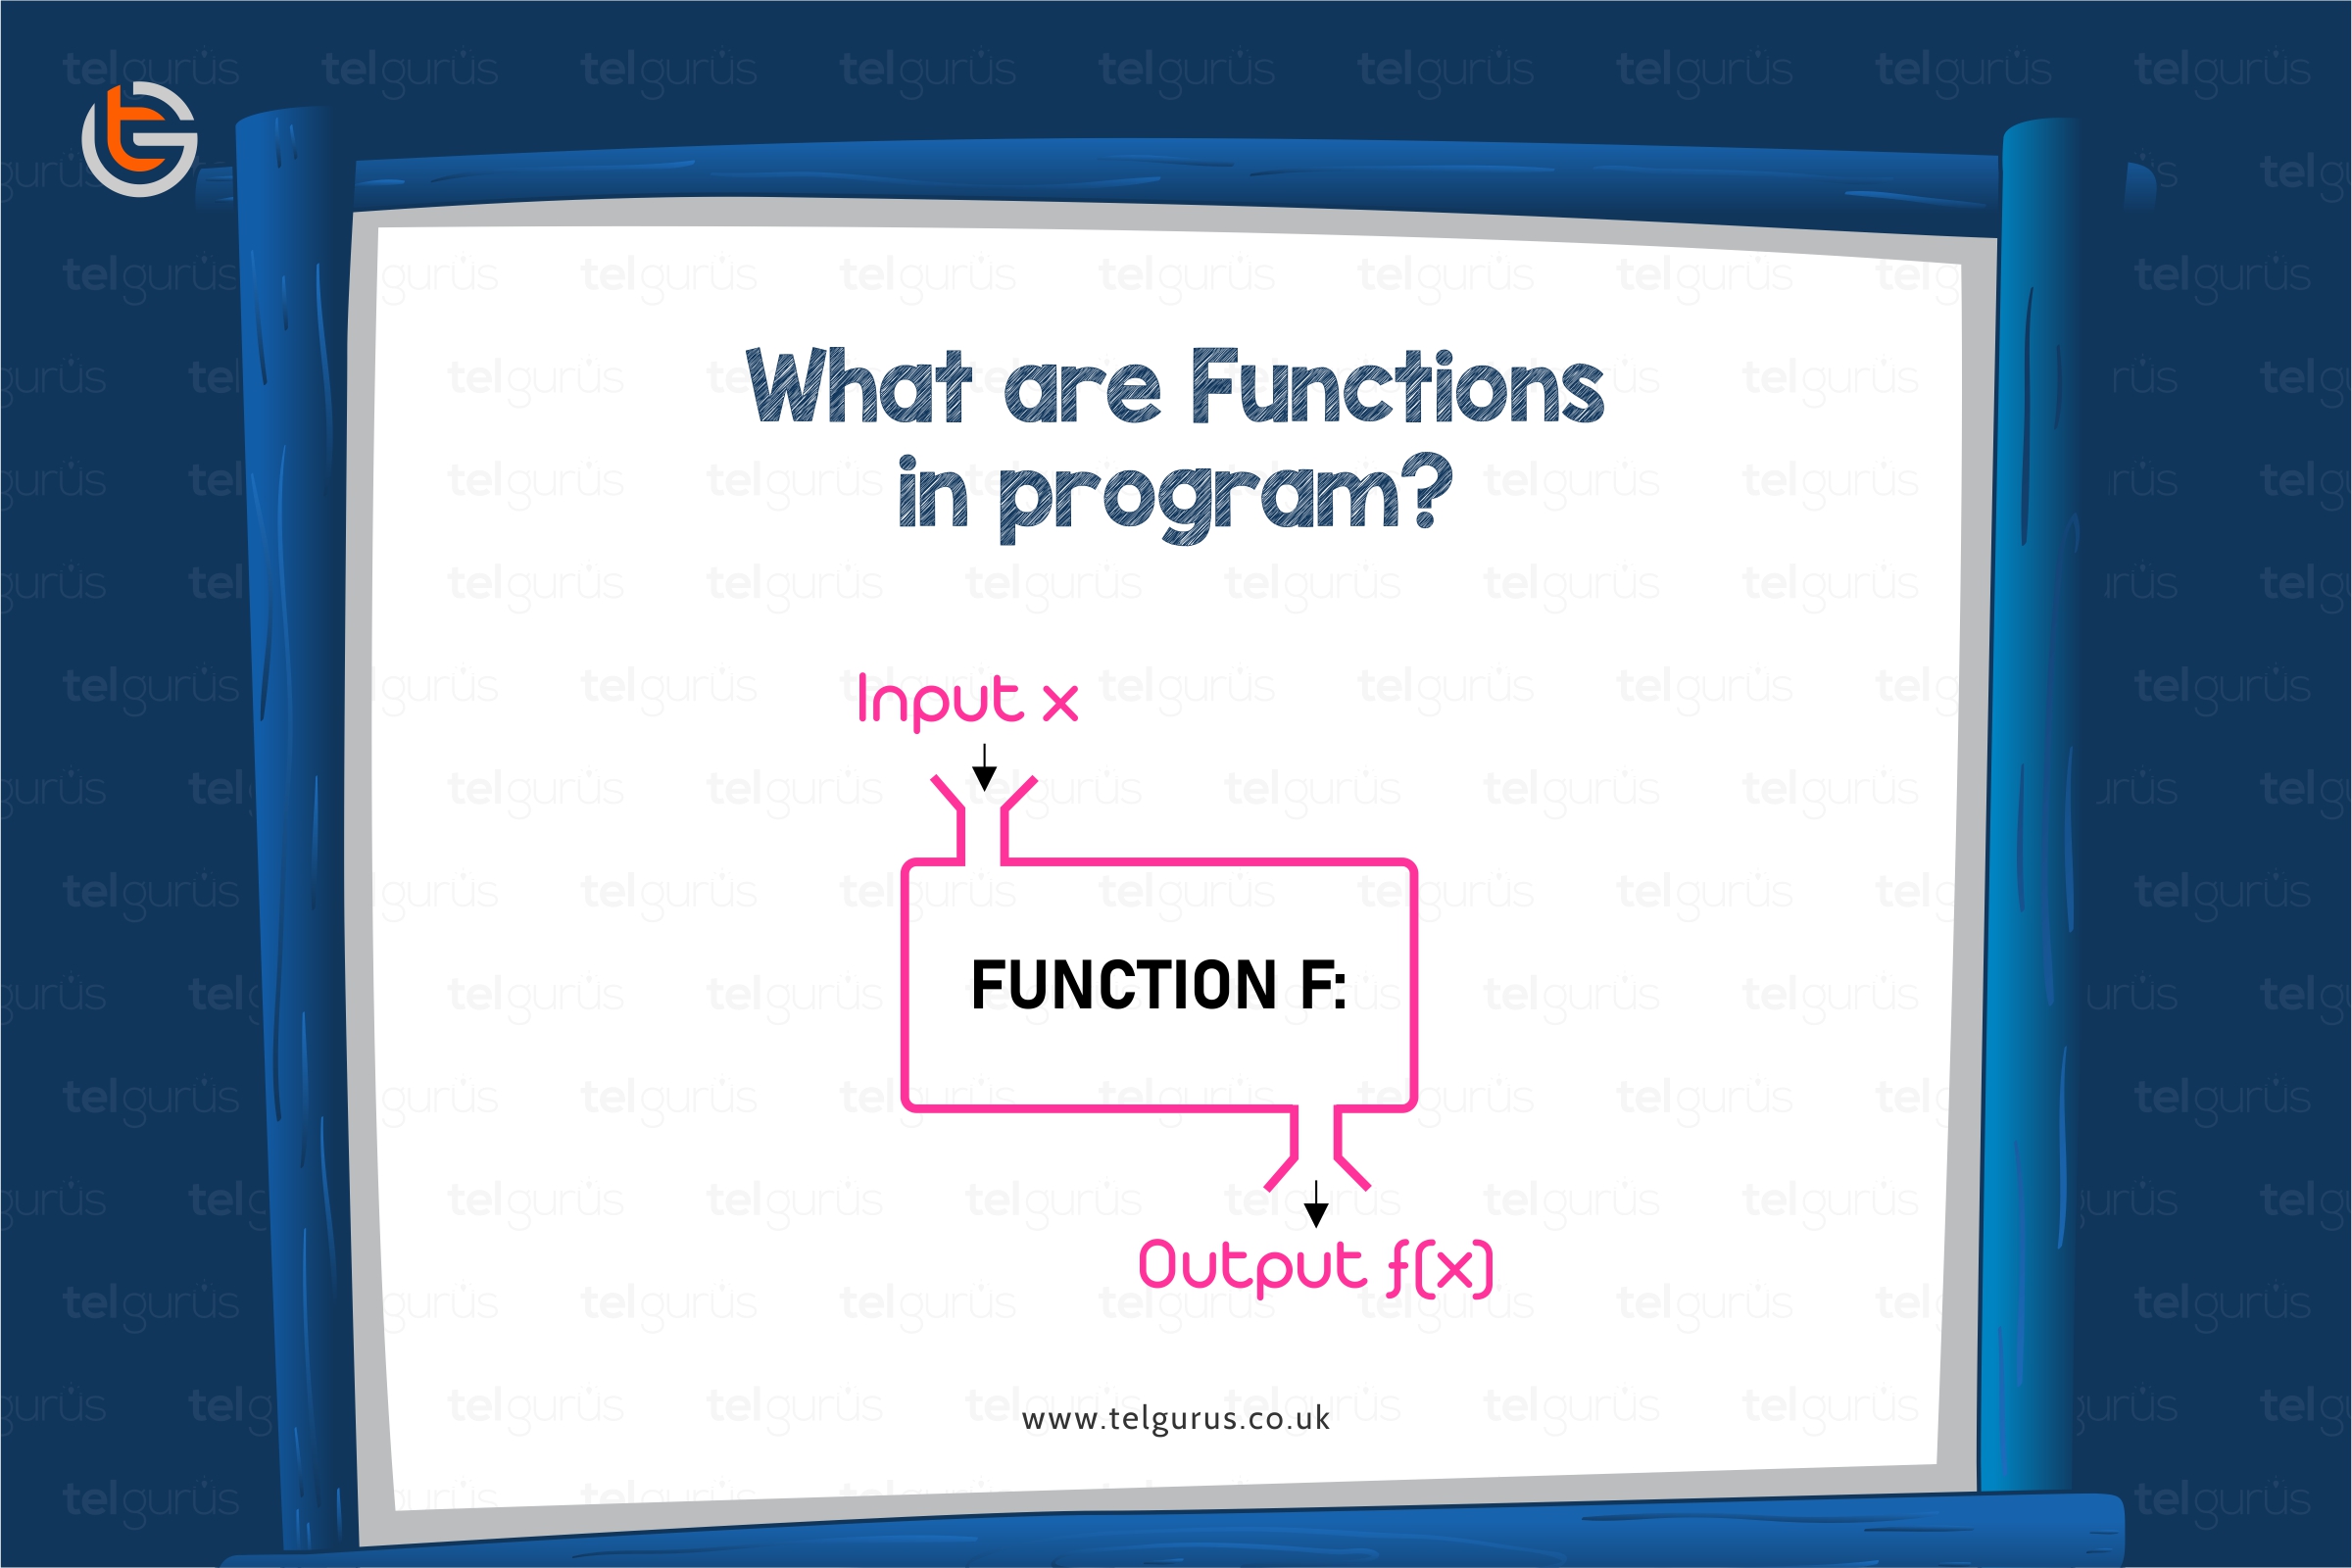 What are Functions in program